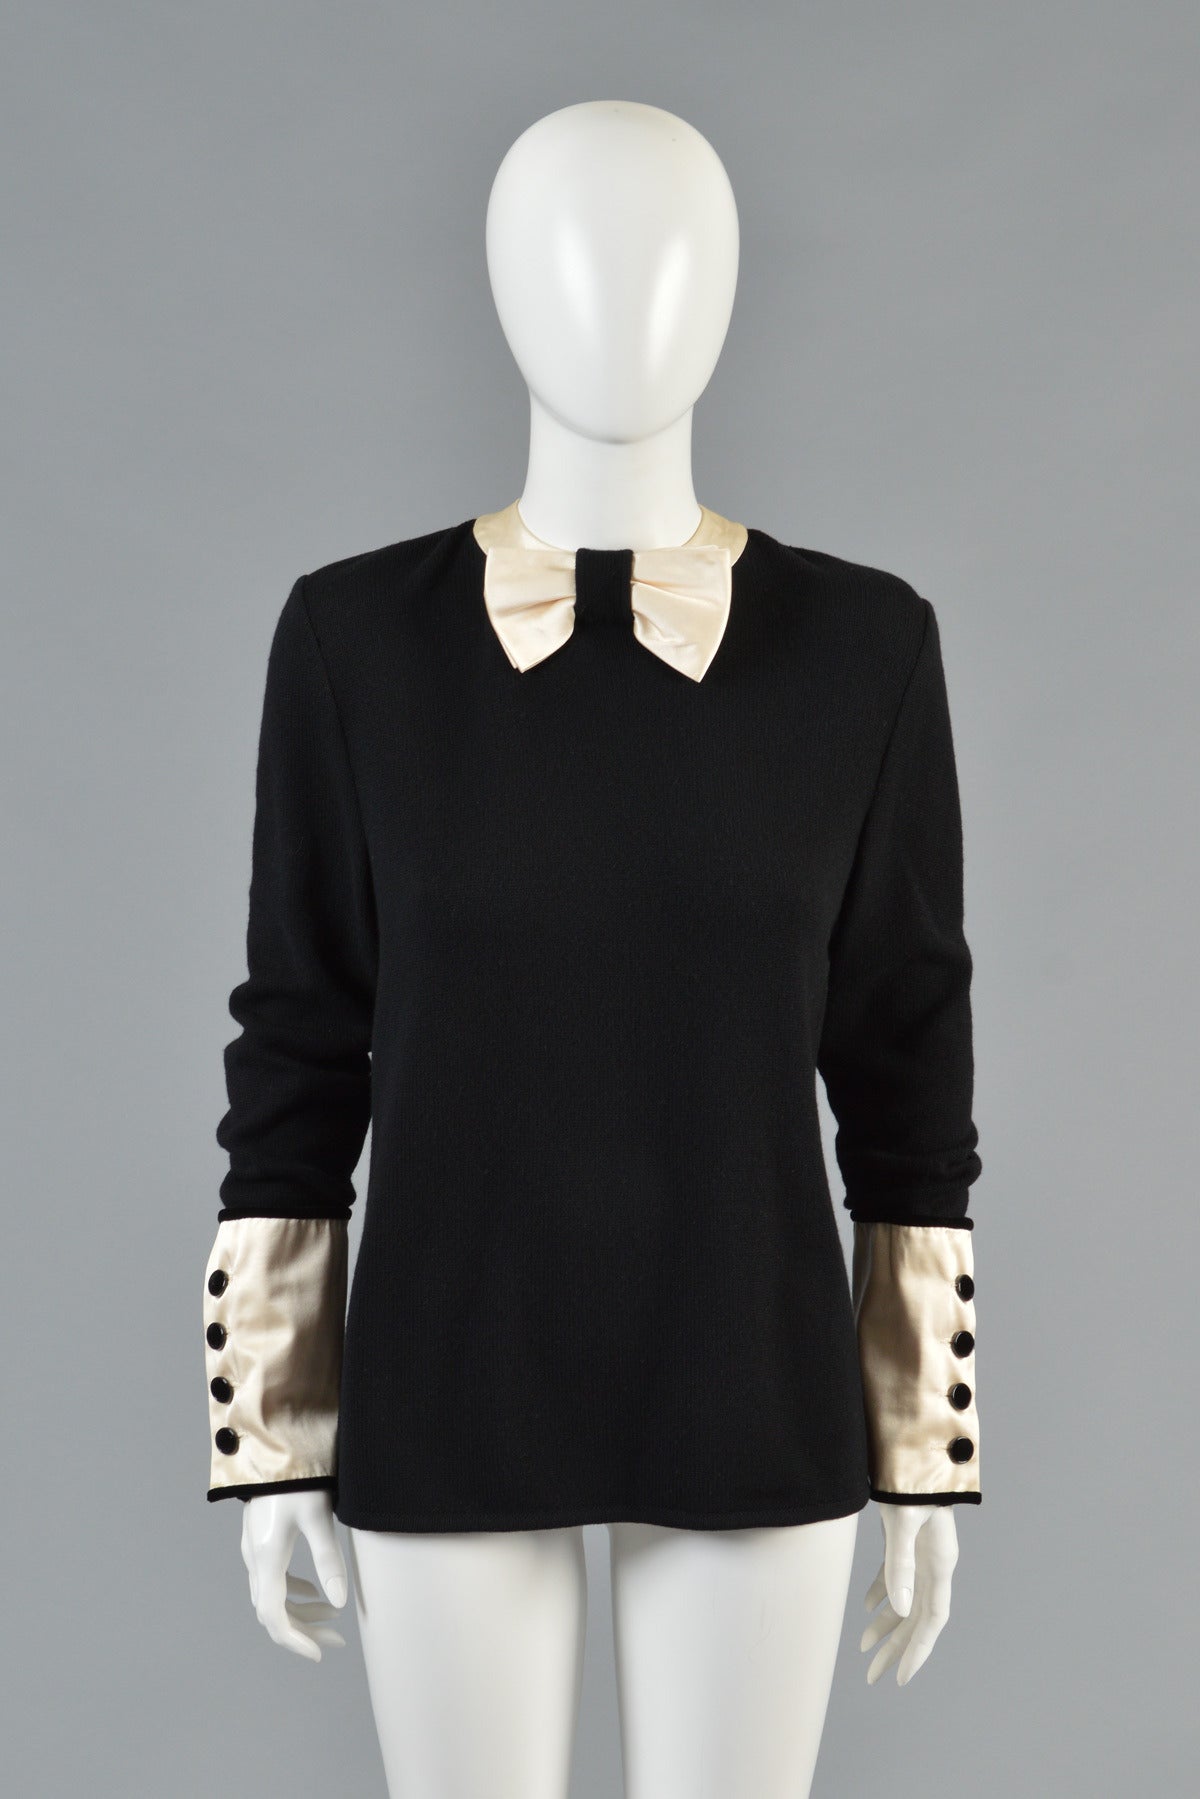 Recently reduced from $590 to $395

Everyone loves a tuxedo themed dress, jacket or top and we are so happy to have this 1980's Valentino cashmere and silk sweater! One of the cutest sweaters we've had to date!

Simple slightly-boxy cut black